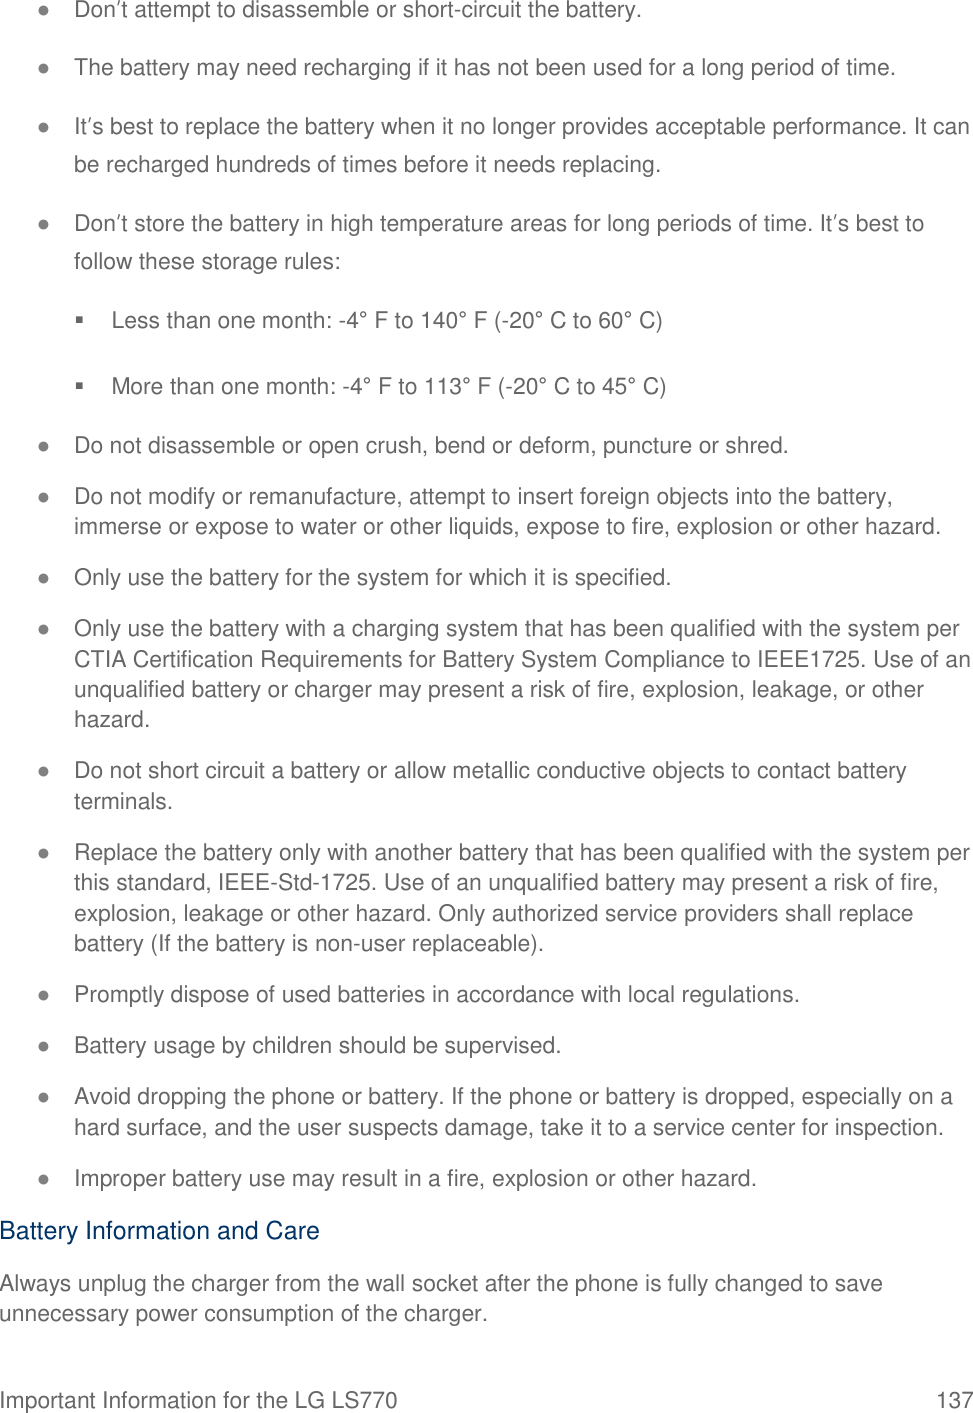  Important Information for the LG LS770  137 ● Don’t attempt to disassemble or short-circuit the battery. ● The battery may need recharging if it has not been used for a long period of time. ● It’s best to replace the battery when it no longer provides acceptable performance. It can be recharged hundreds of times before it needs replacing. ● Don’t store the battery in high temperature areas for long periods of time. It’s best to follow these storage rules:   Less than one month: -4° F to 140° F (-20° C to 60° C)   More than one month: -4° F to 113° F (-20° C to 45° C) ● Do not disassemble or open crush, bend or deform, puncture or shred. ● Do not modify or remanufacture, attempt to insert foreign objects into the battery, immerse or expose to water or other liquids, expose to fire, explosion or other hazard. ● Only use the battery for the system for which it is specified. ● Only use the battery with a charging system that has been qualified with the system per CTIA Certification Requirements for Battery System Compliance to IEEE1725. Use of an unqualified battery or charger may present a risk of fire, explosion, leakage, or other hazard. ● Do not short circuit a battery or allow metallic conductive objects to contact battery terminals. ● Replace the battery only with another battery that has been qualified with the system per this standard, IEEE-Std-1725. Use of an unqualified battery may present a risk of fire, explosion, leakage or other hazard. Only authorized service providers shall replace battery (If the battery is non-user replaceable). ● Promptly dispose of used batteries in accordance with local regulations. ● Battery usage by children should be supervised. ● Avoid dropping the phone or battery. If the phone or battery is dropped, especially on a hard surface, and the user suspects damage, take it to a service center for inspection. ● Improper battery use may result in a fire, explosion or other hazard. Battery Information and Care Always unplug the charger from the wall socket after the phone is fully changed to save unnecessary power consumption of the charger. 